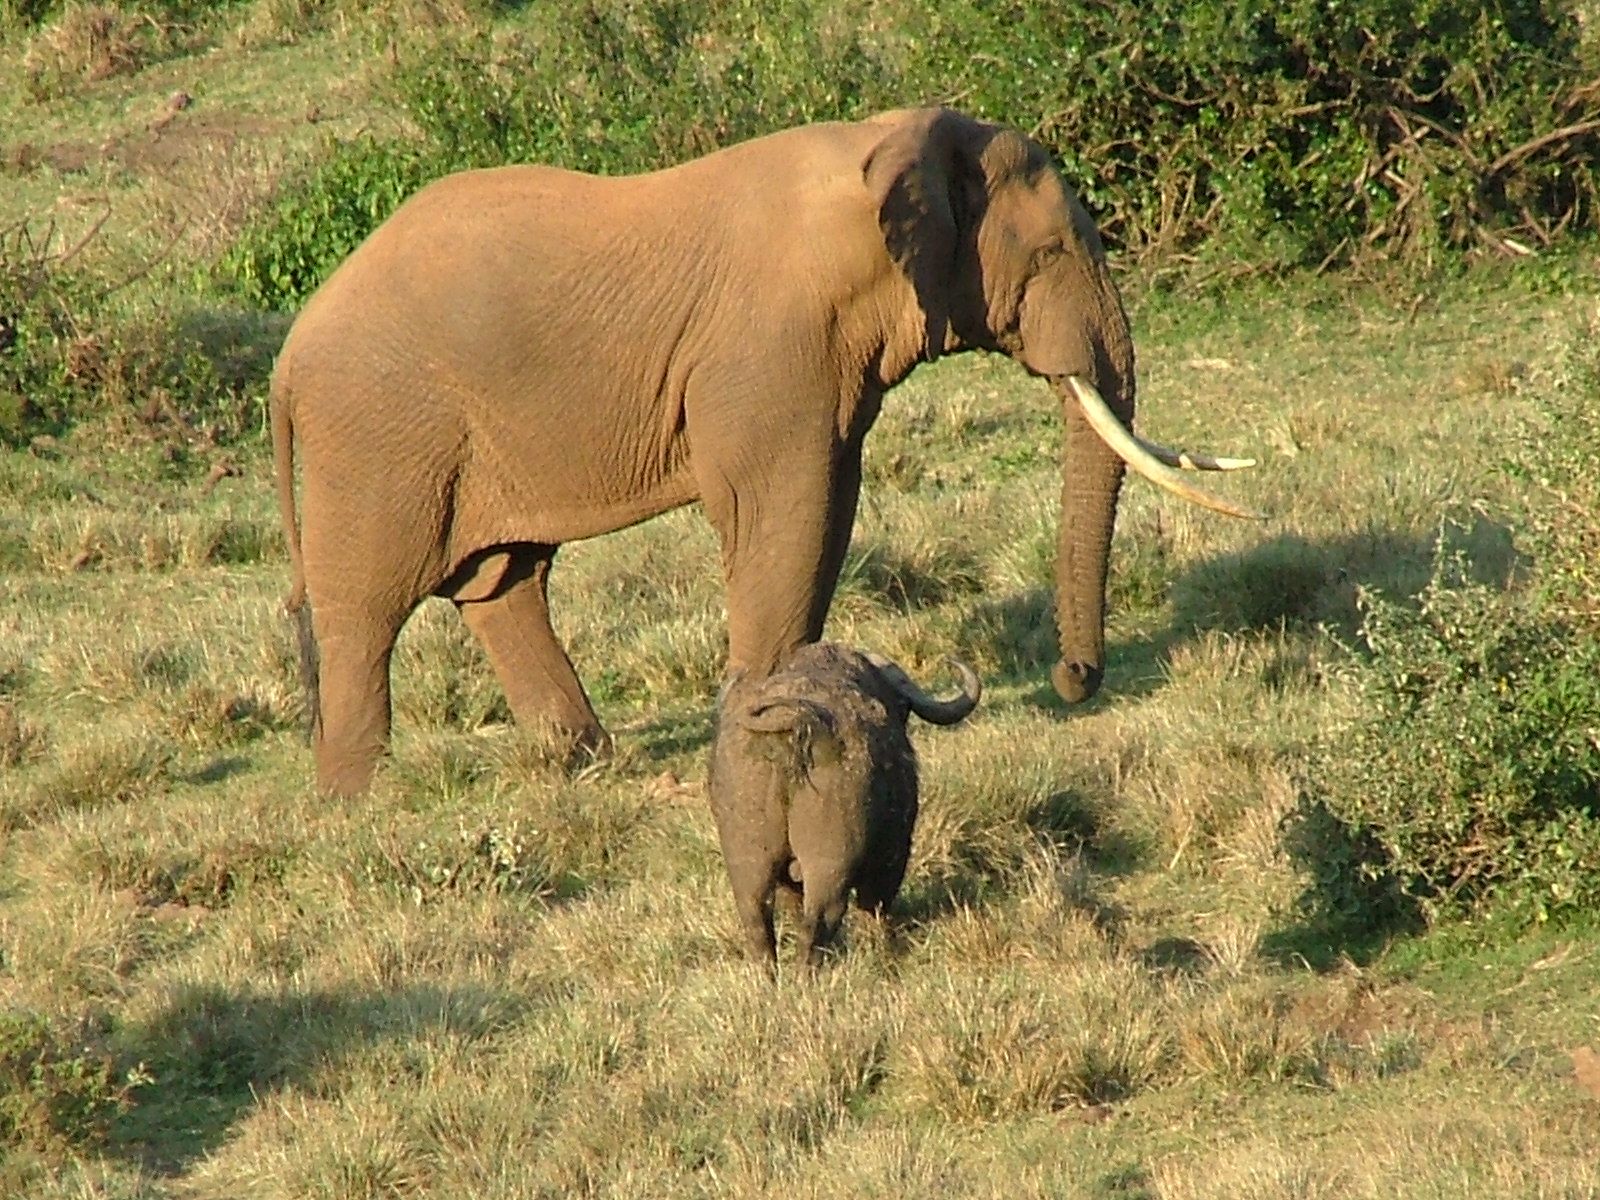 Mom and baby elephant